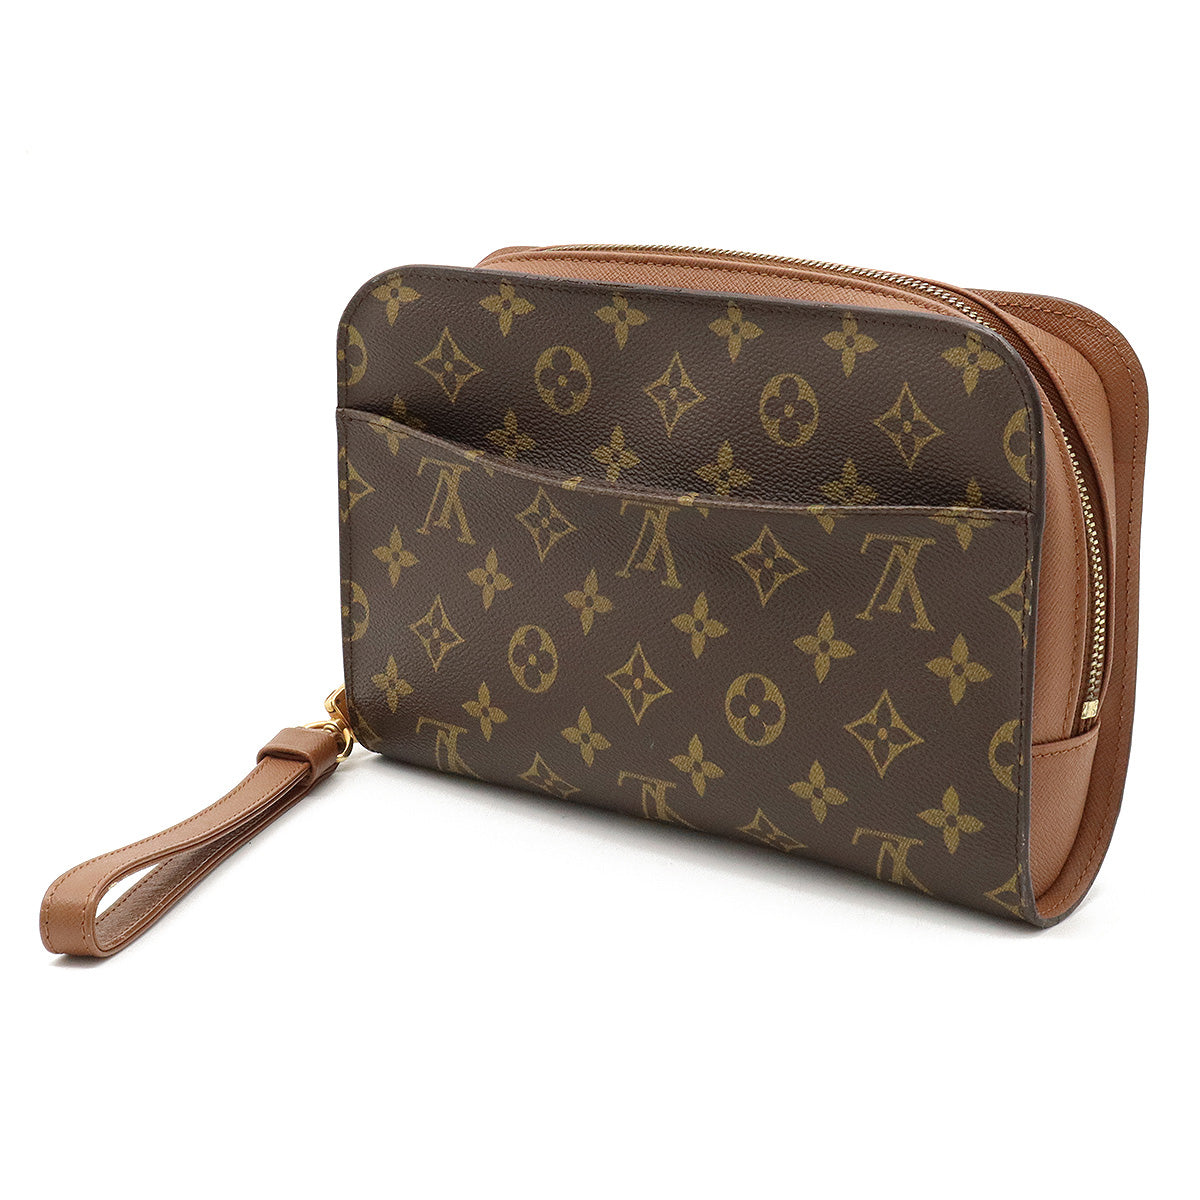 Louis+Vuitton+Orsay+Clutch+Brown+Leather for sale online